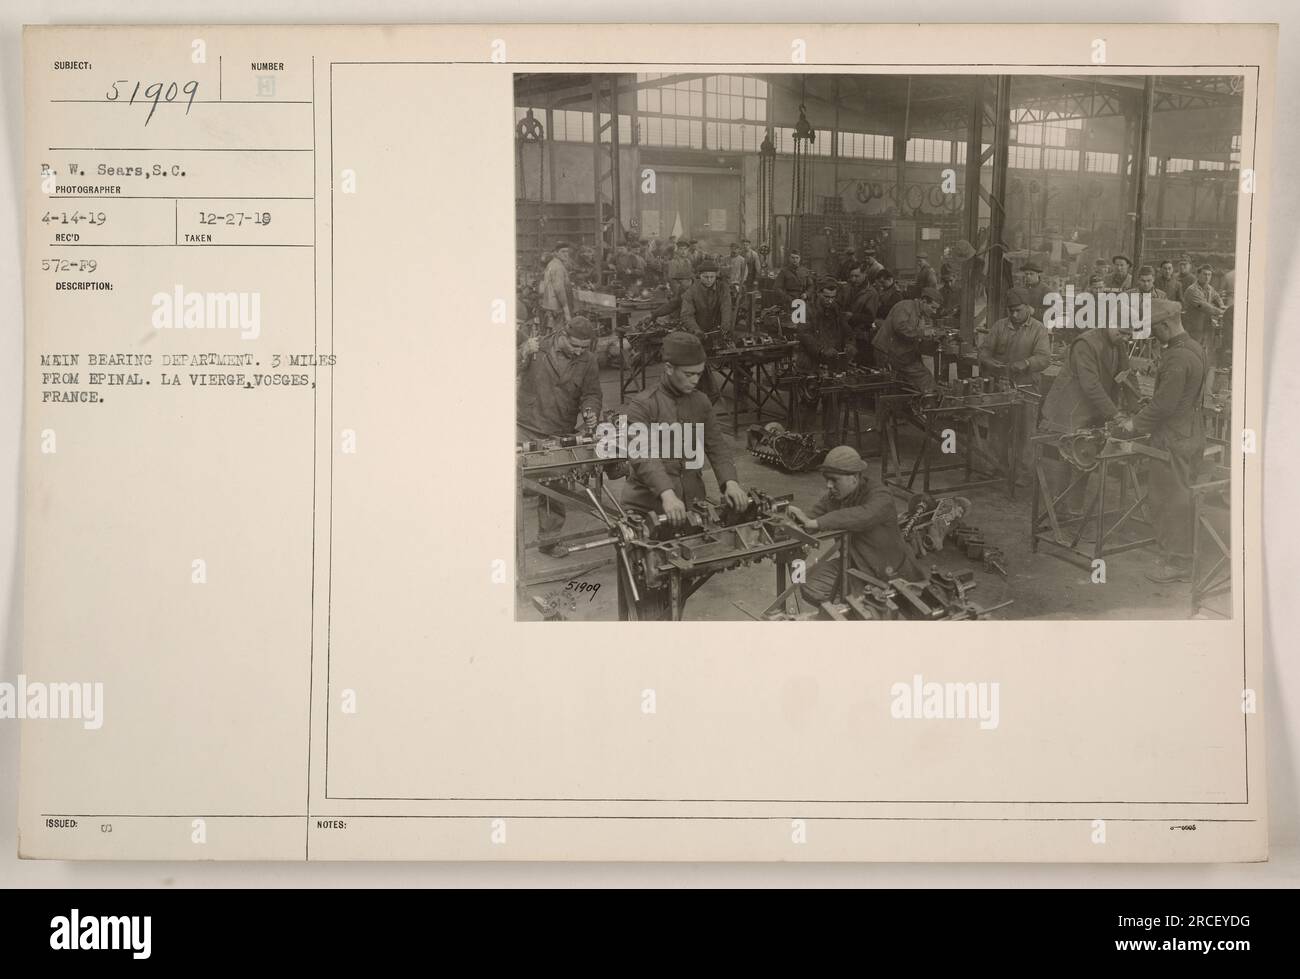 Image showing the main bearing department located 3 miles from Epinal, in La Vierge, Vosges, France. The photograph was taken on April 14, 1919, by R.W. Sears, S.C. It was received on December 27, 1919, and has the reference number 57909. Stock Photo